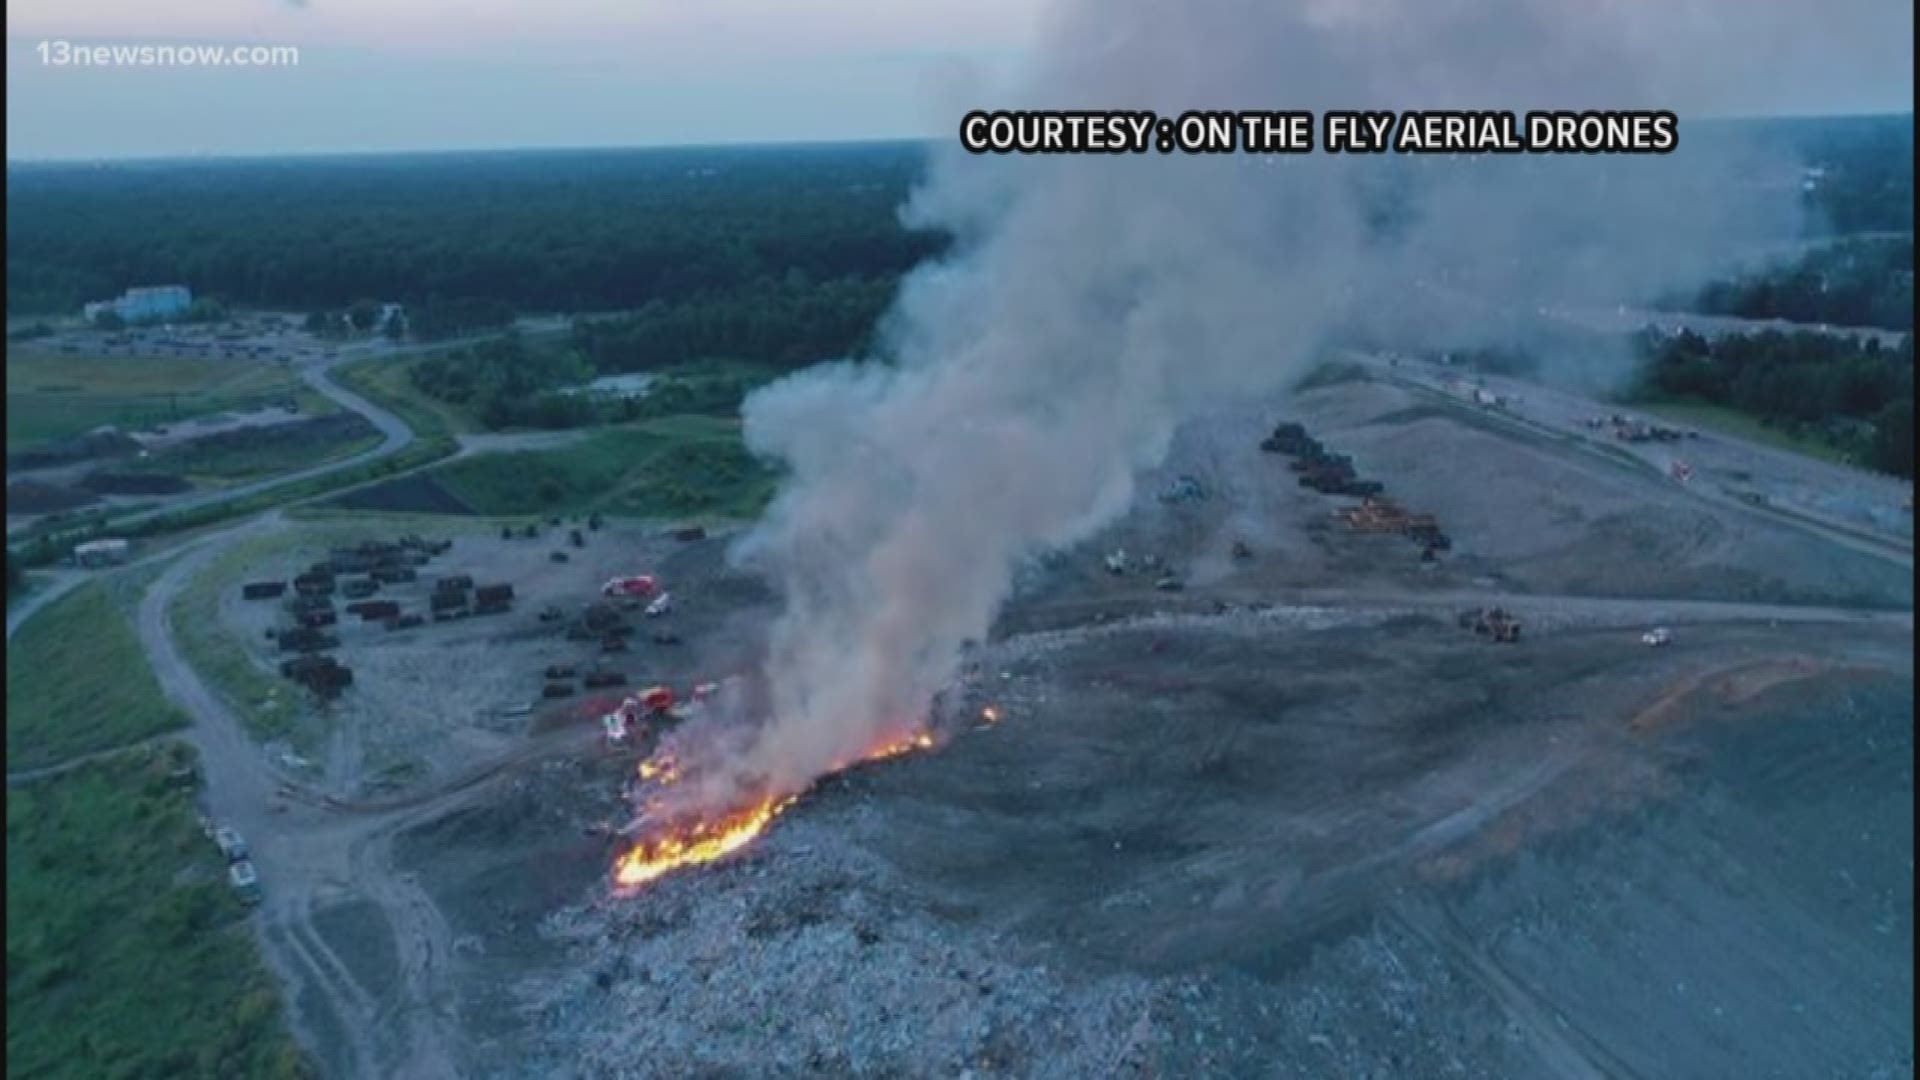 At 7:33 p.m. there were reports of a fire at the Virginia Beach Landfill., but by 9:45 p.m. the fire was out.